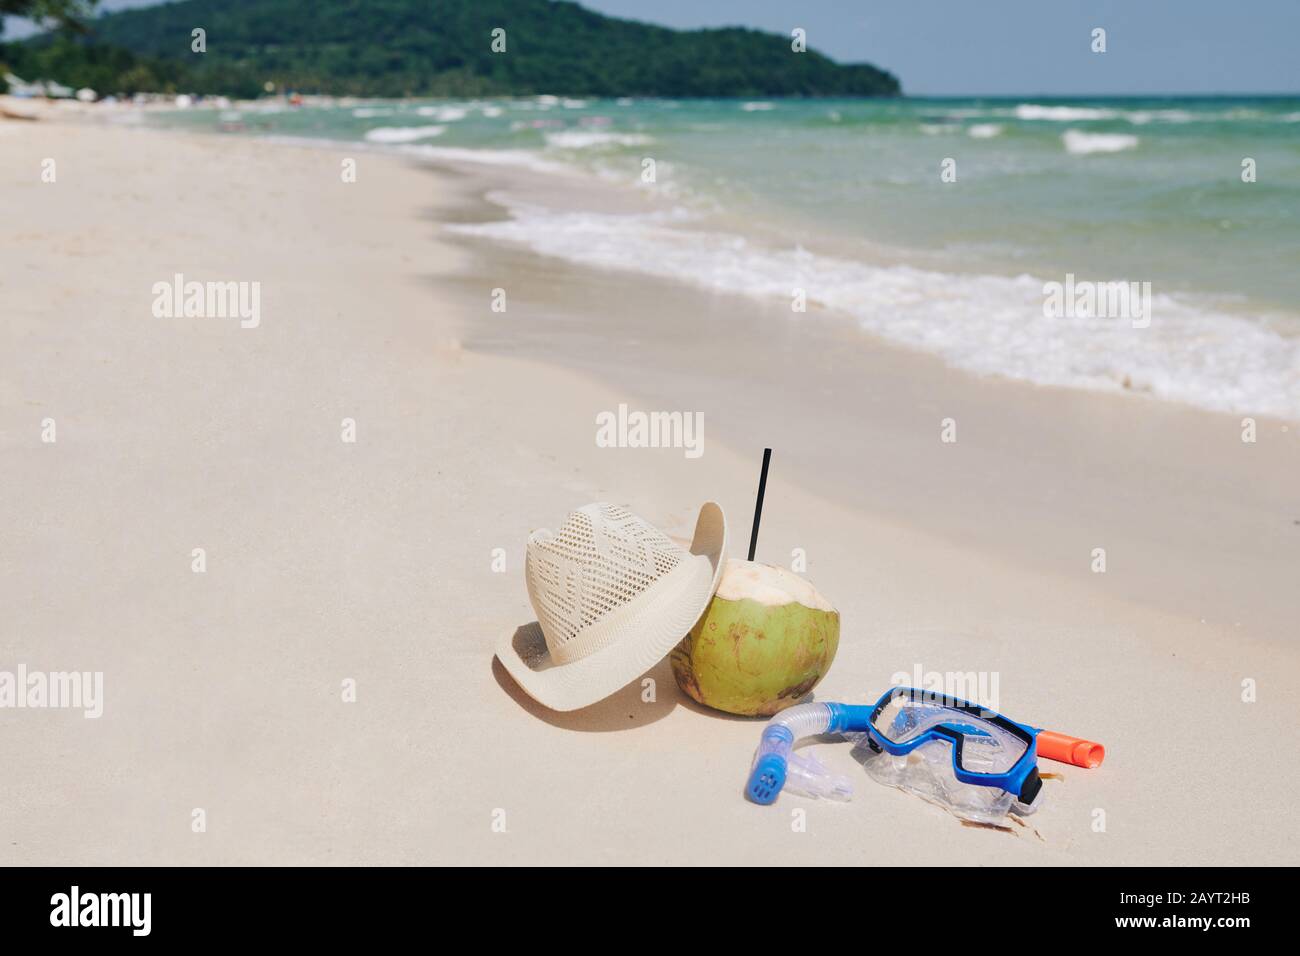 Snorkeling mask, straw hat and coconut cocktail on sandy beach, summer activities concept Stock Photo